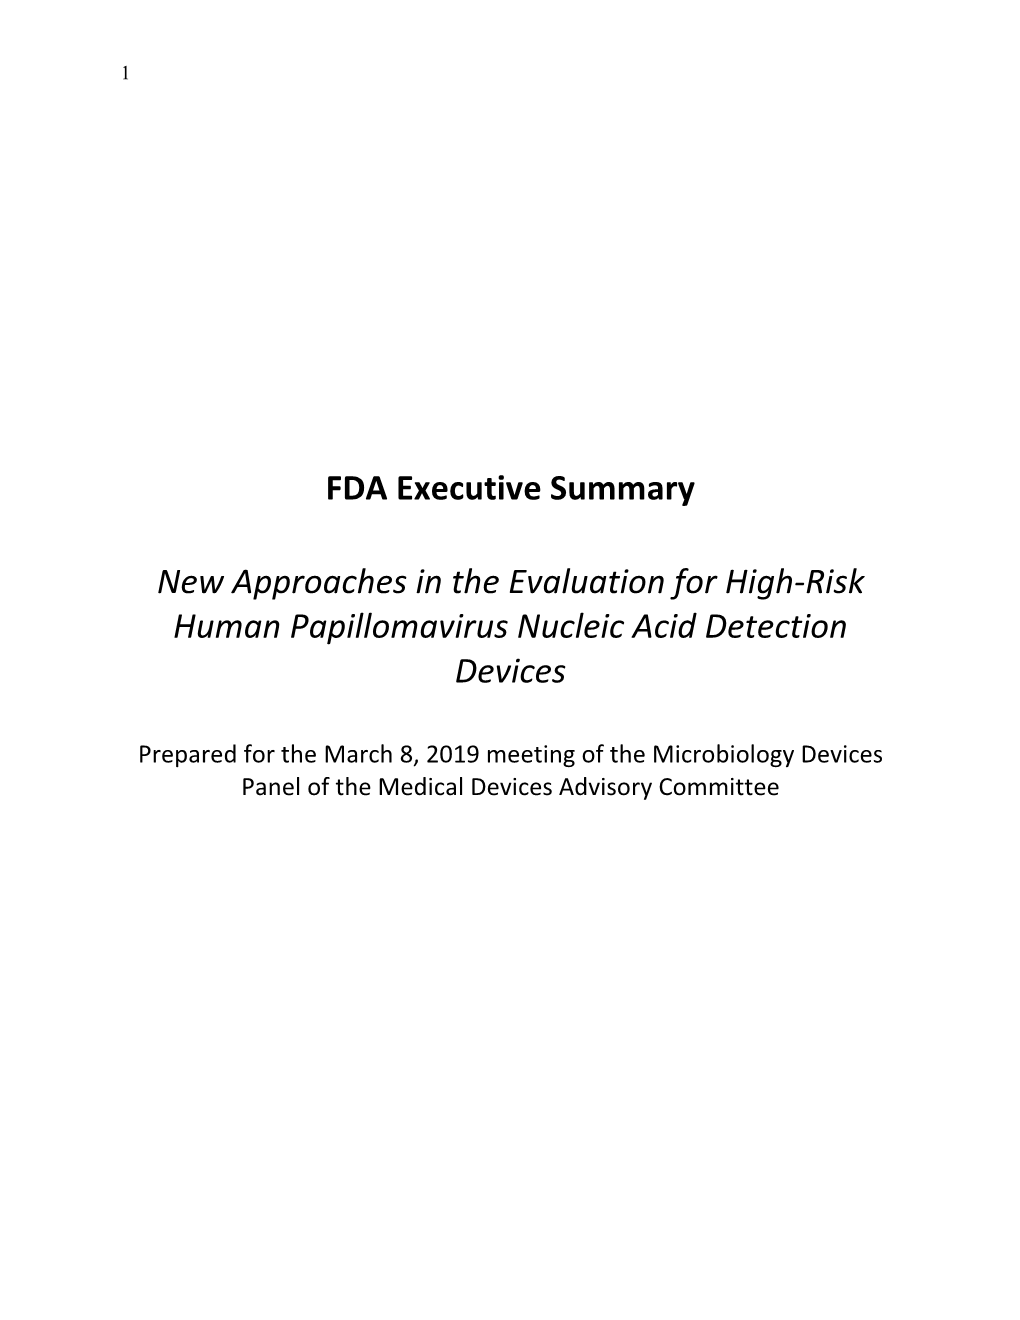 FDA Executive Summary New Approaches in the Evaluation For